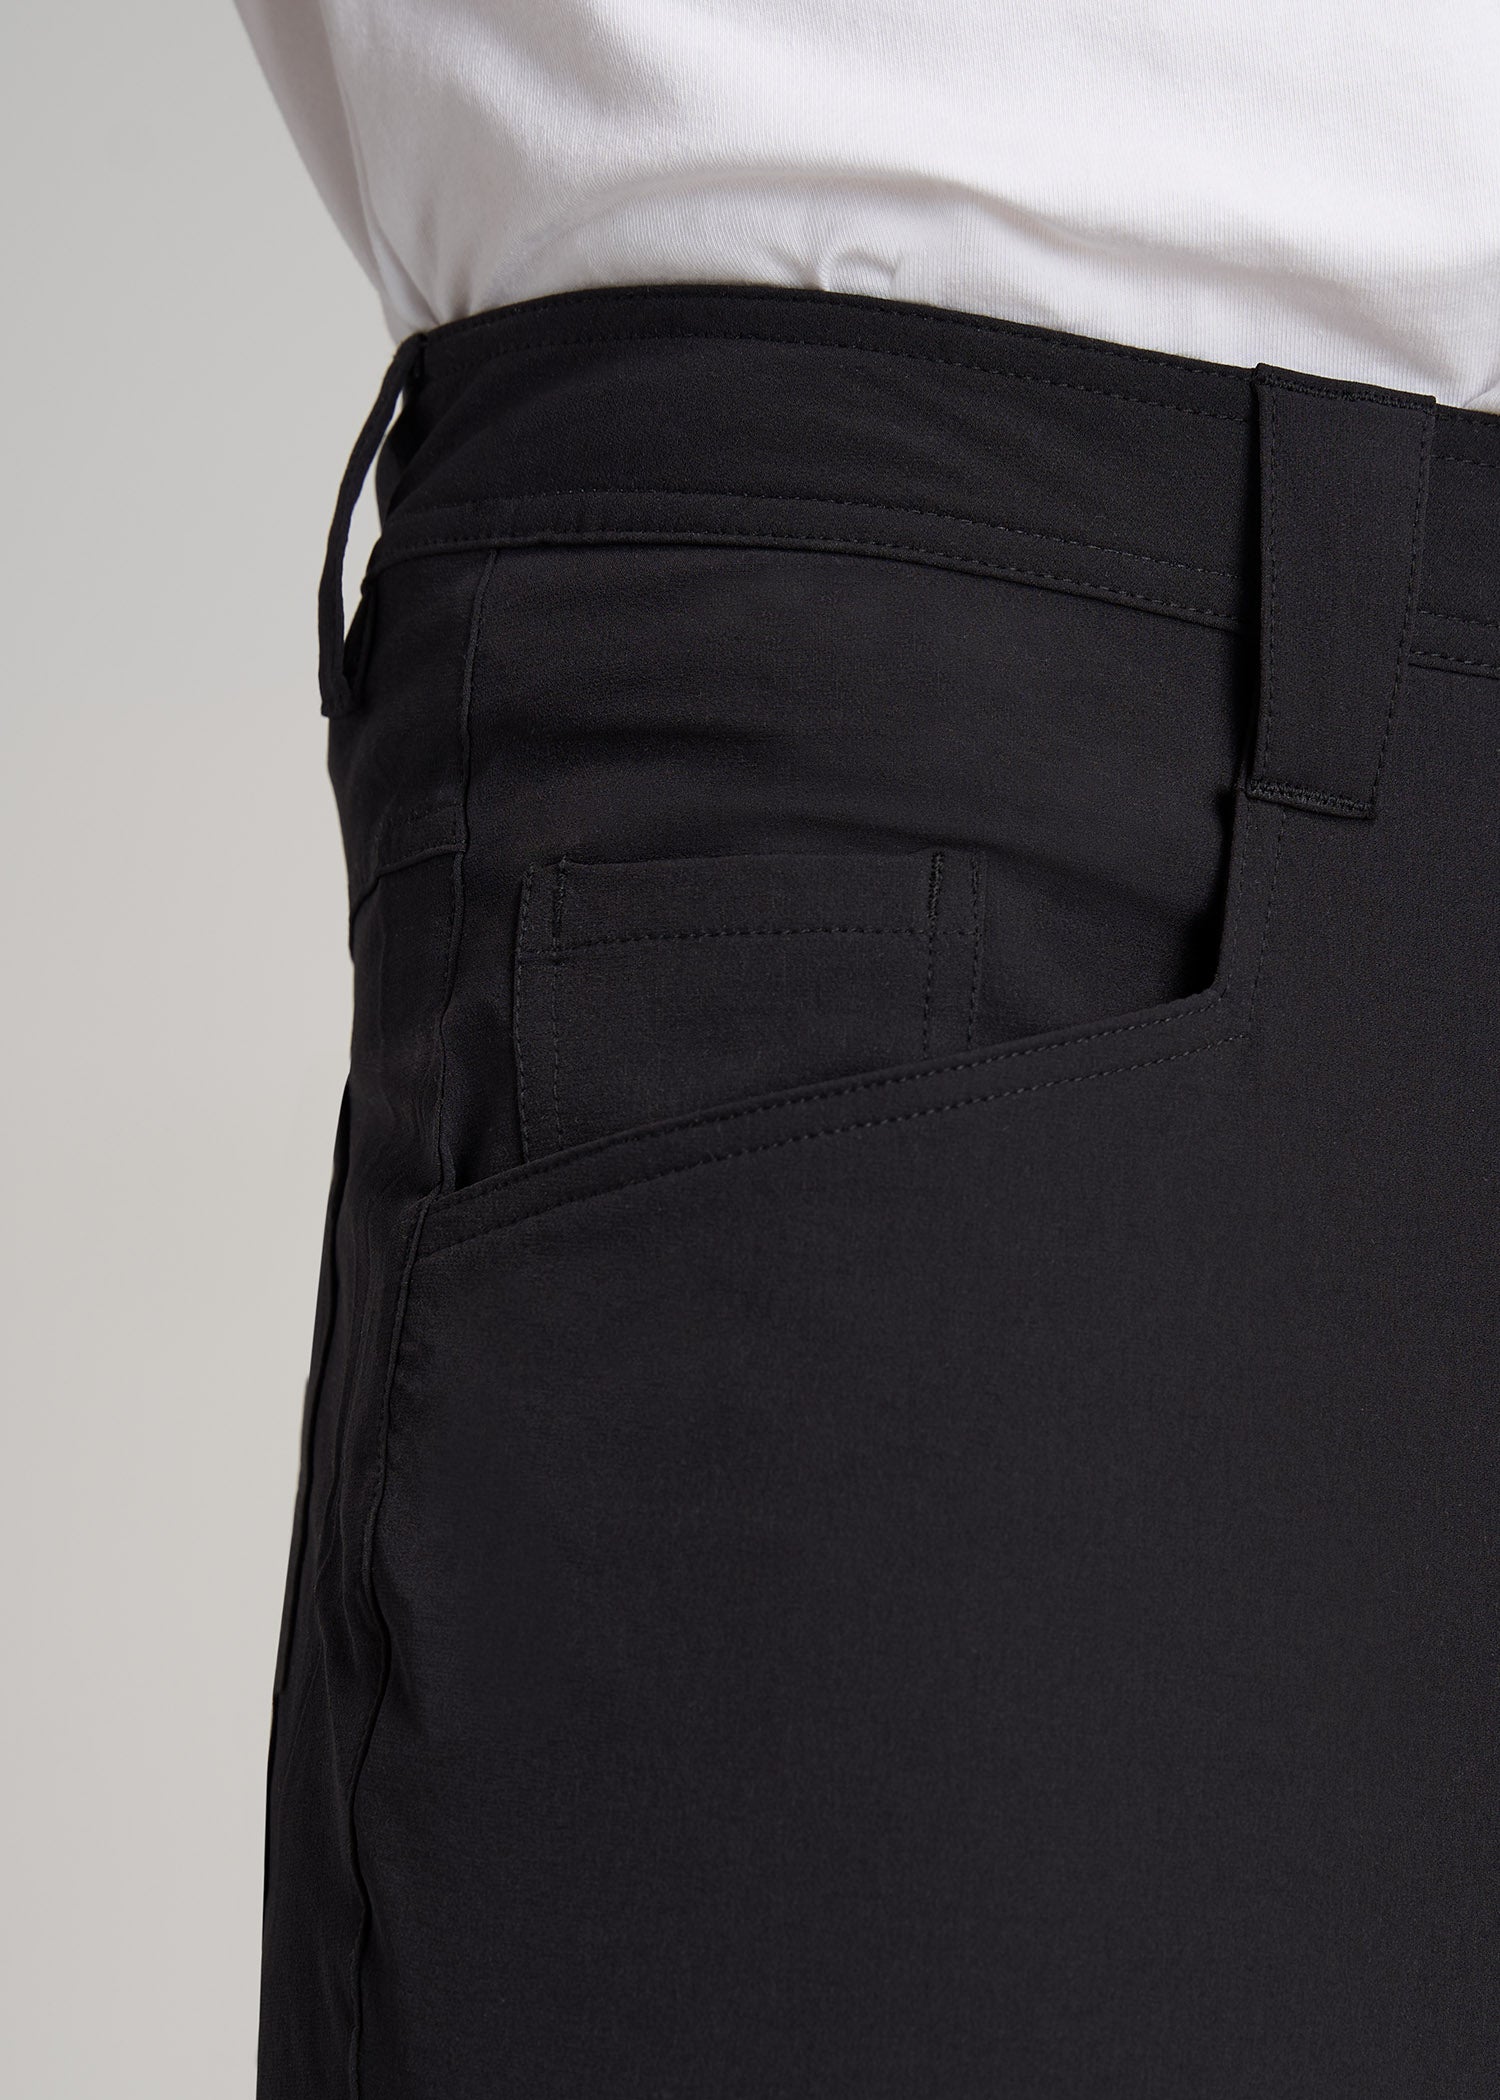 Hiking Shorts for Tall Men in Black | American Tall